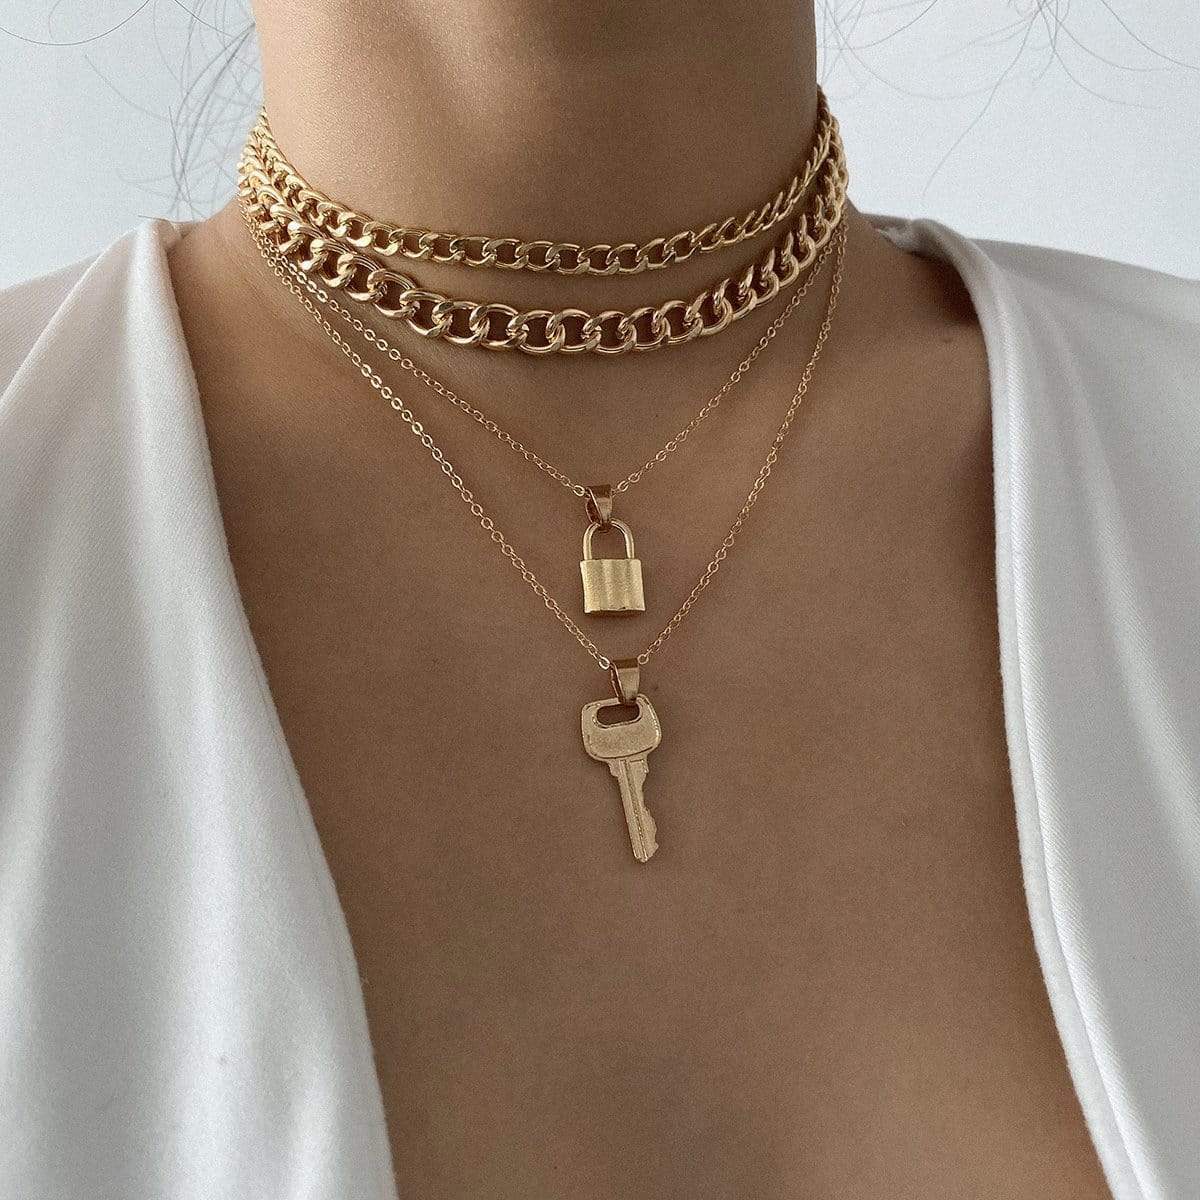 necklace gold lock and key